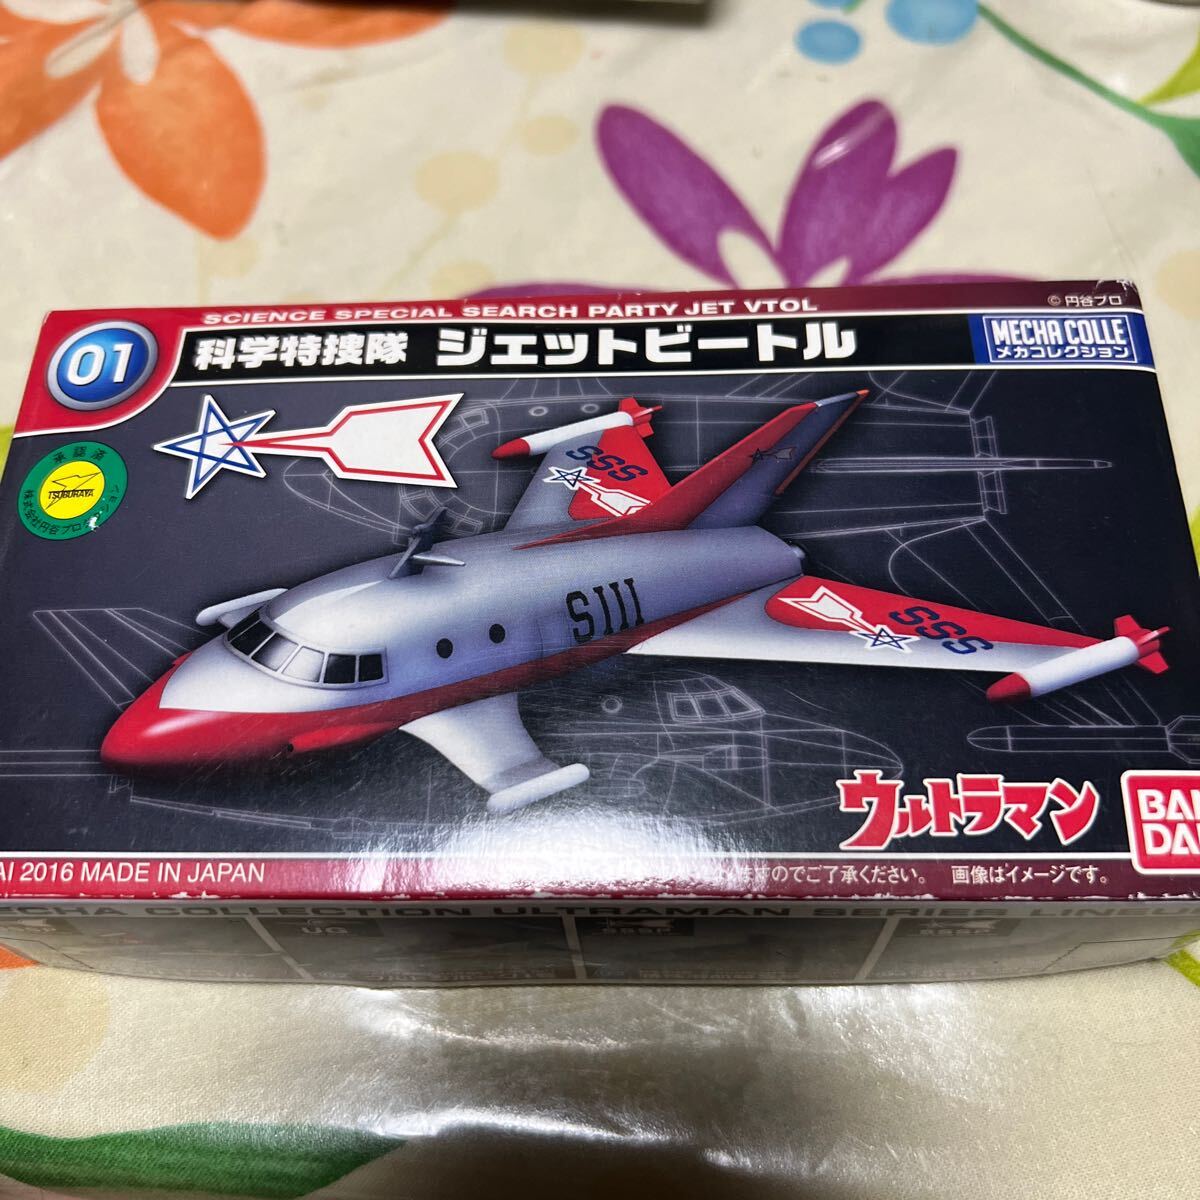  Ultraman mechanism collection jet Beetle Bandai science Special .. assembly ending 